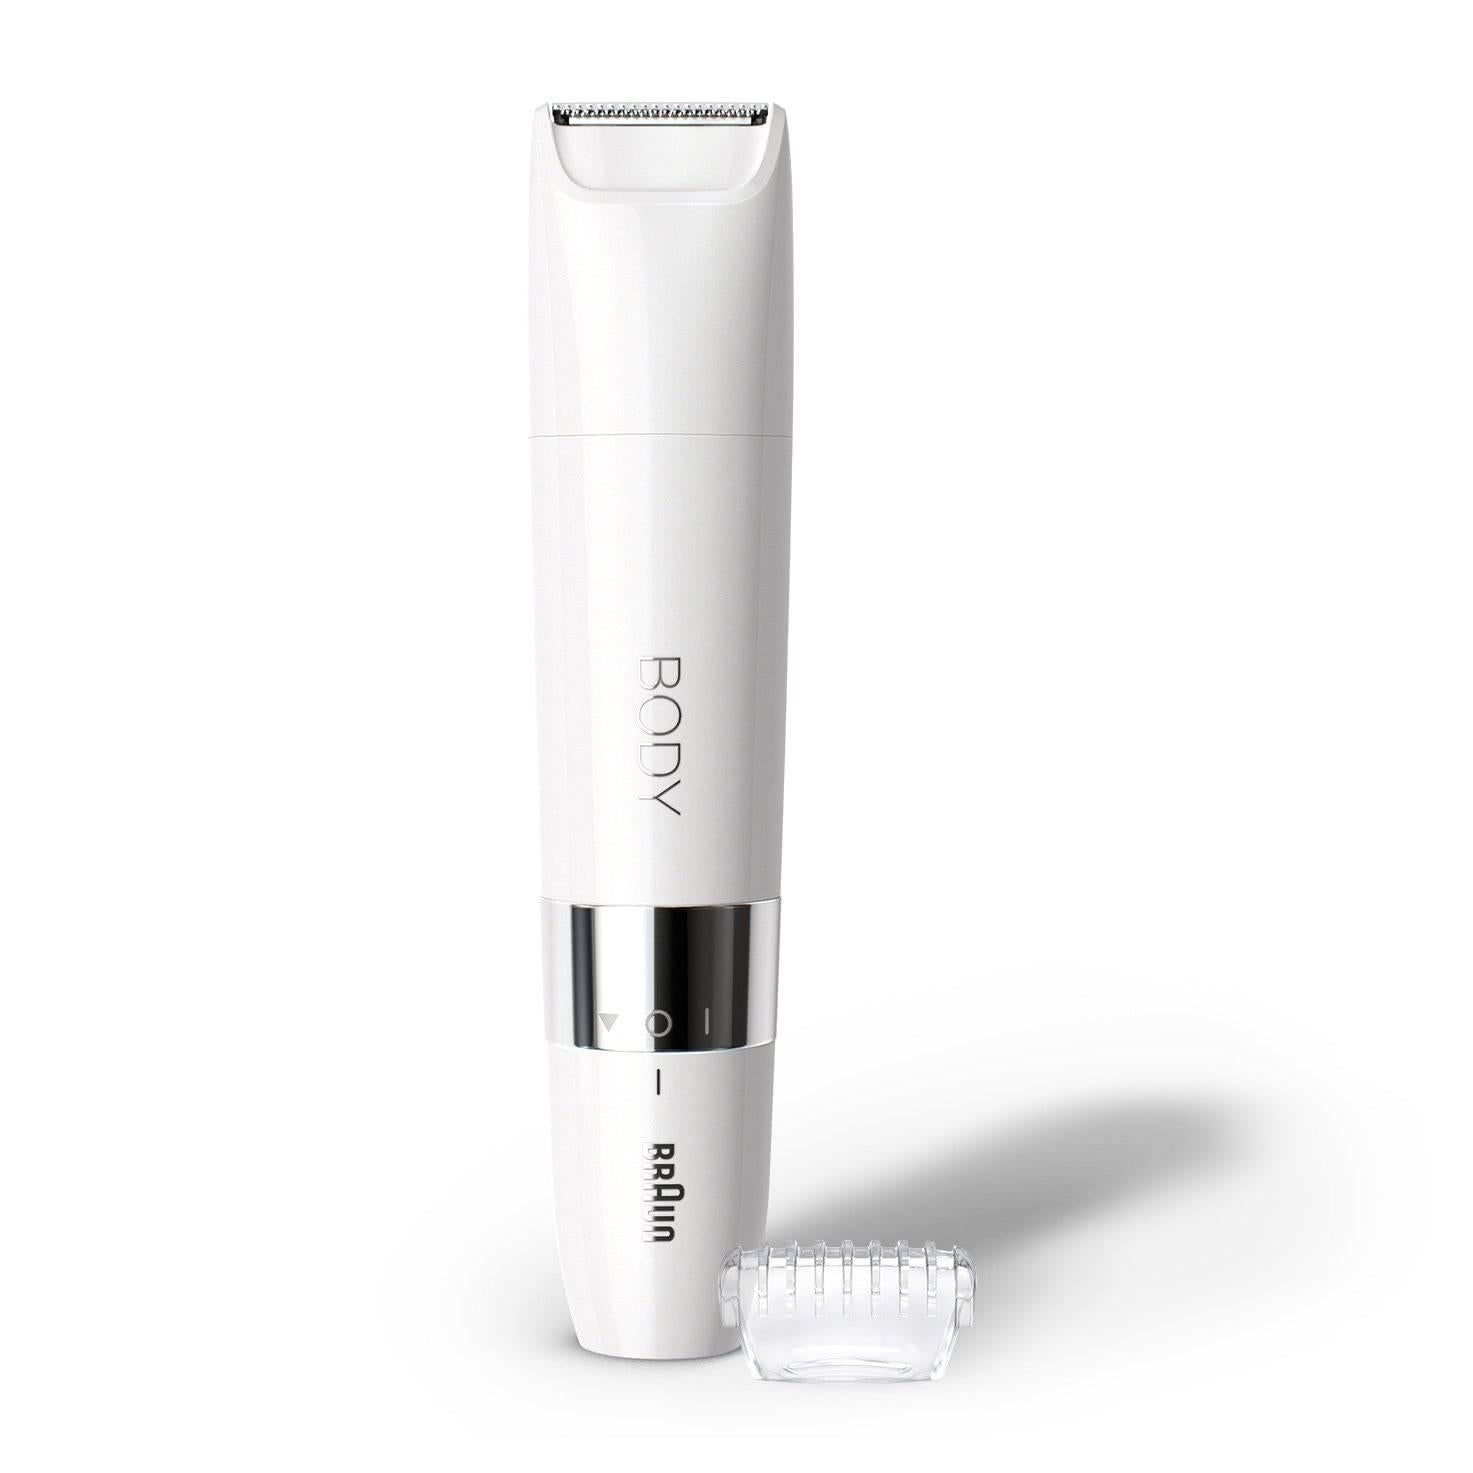 Braun BodyGroom BS1000 Wet & Dry Mini Trimmer - Quick Hair Removal - White - Healthxpress.ie